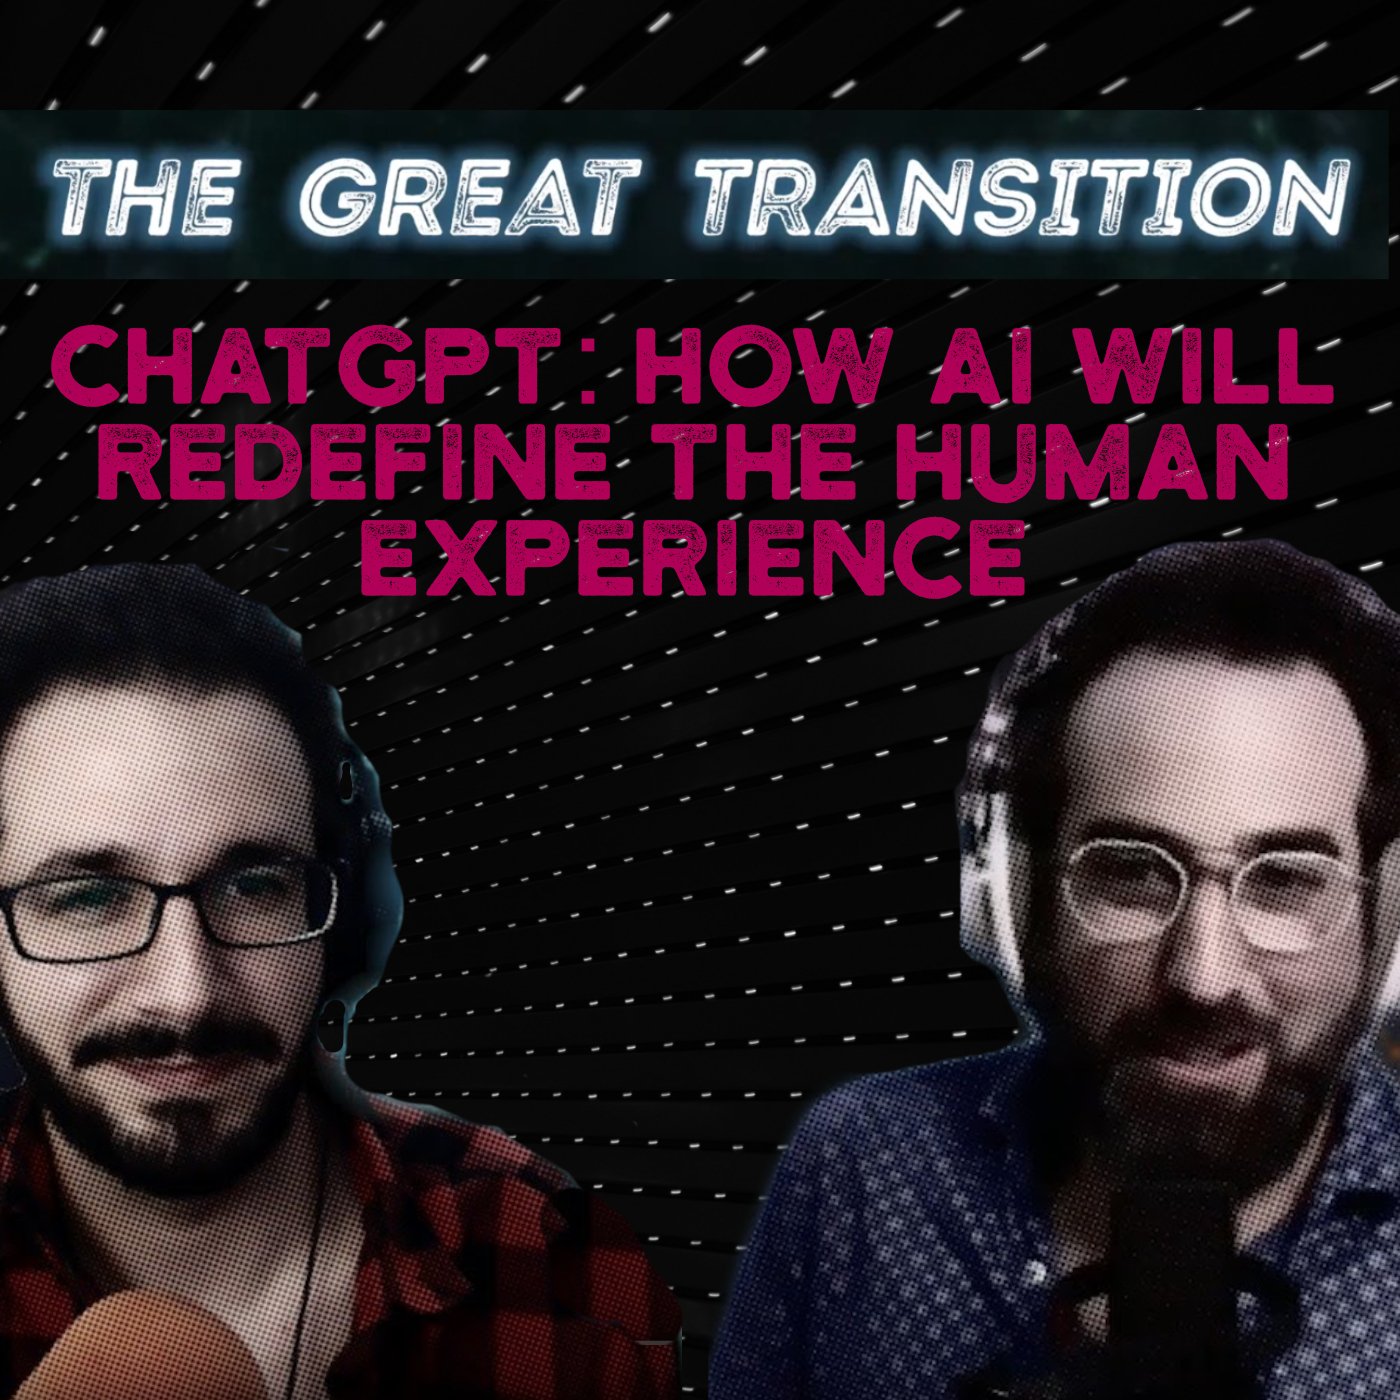 The Great Transition - ChatGPT: How AI Will Redefine The Human Experience